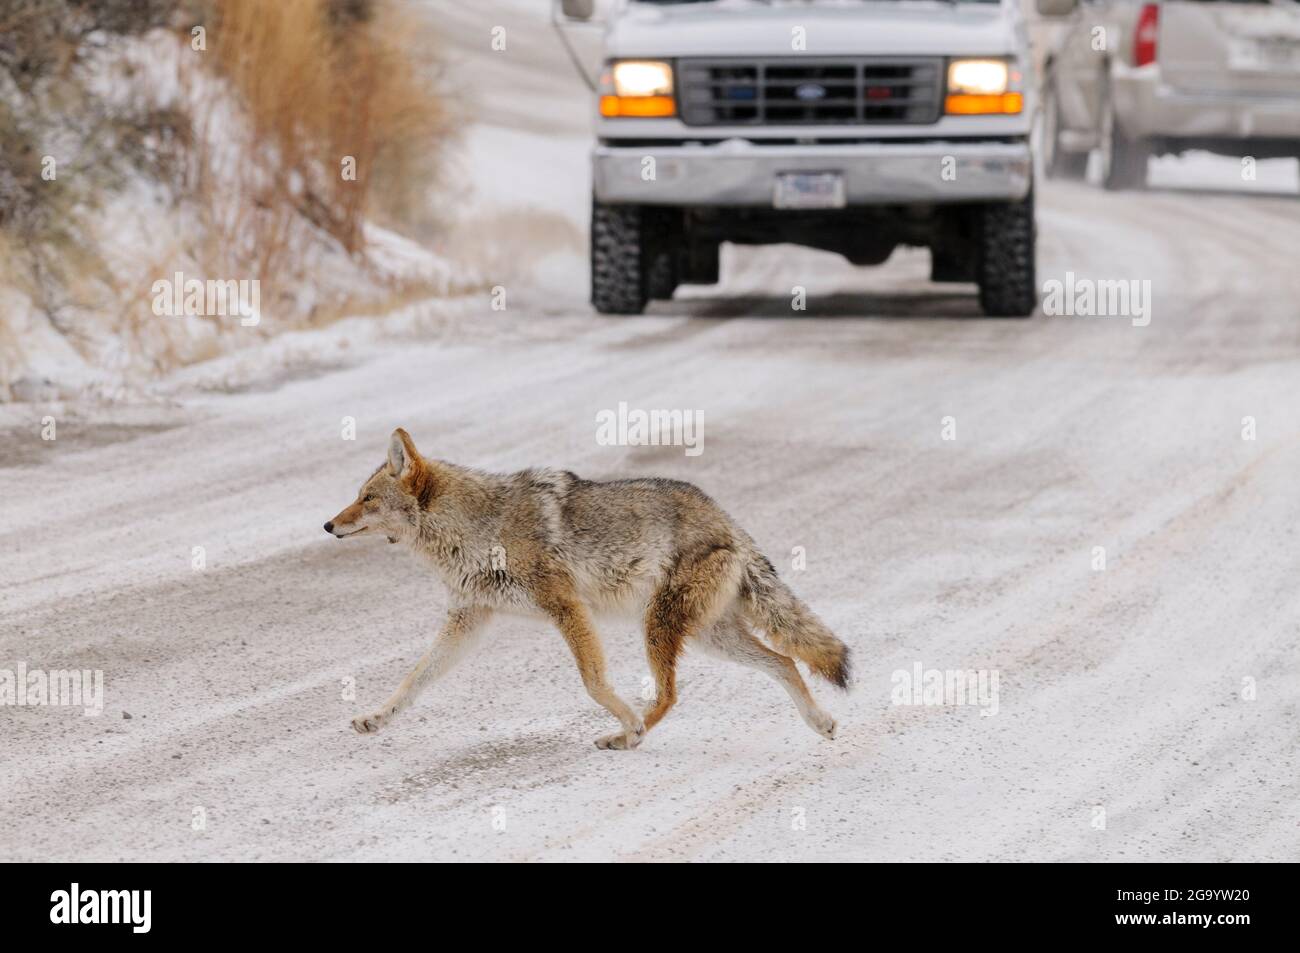 Coyote crossing a road with an approaching car in winter Stock Photo